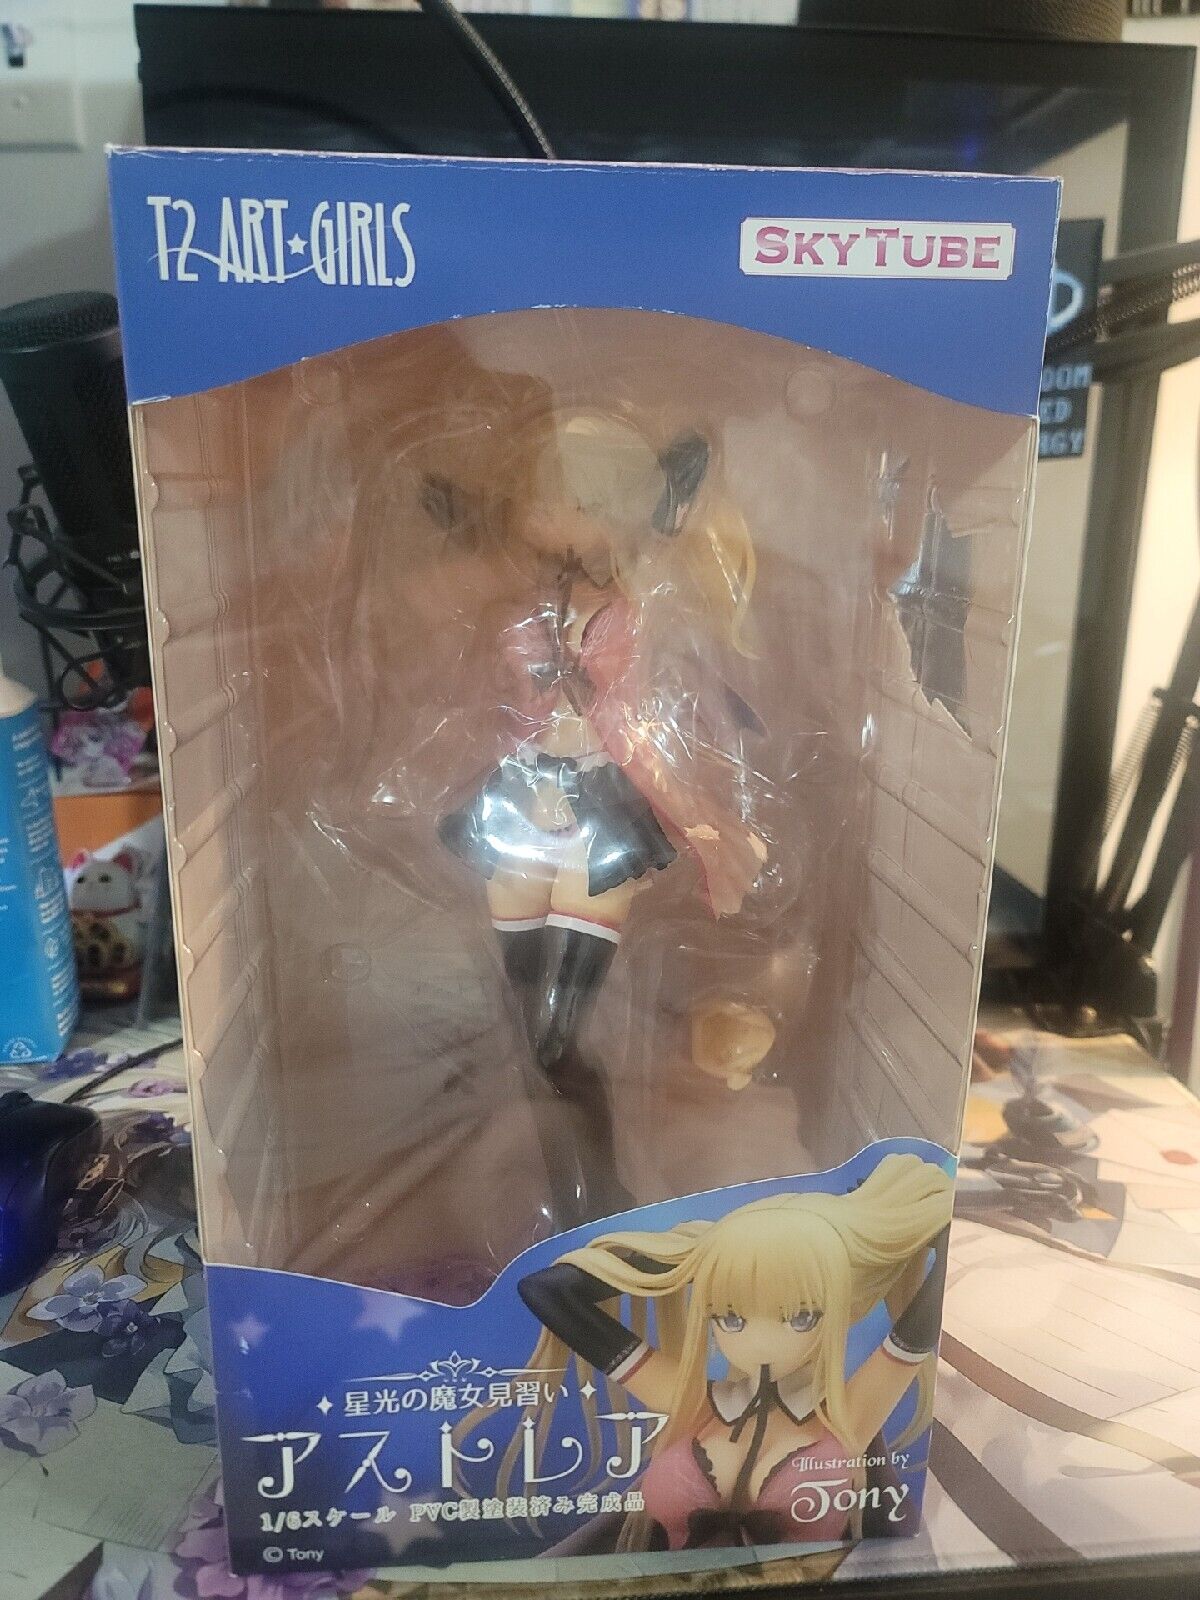 Displayed SKYTUBE T2 Art Girl star light of witch apprentice Astorea 1/6 Scale